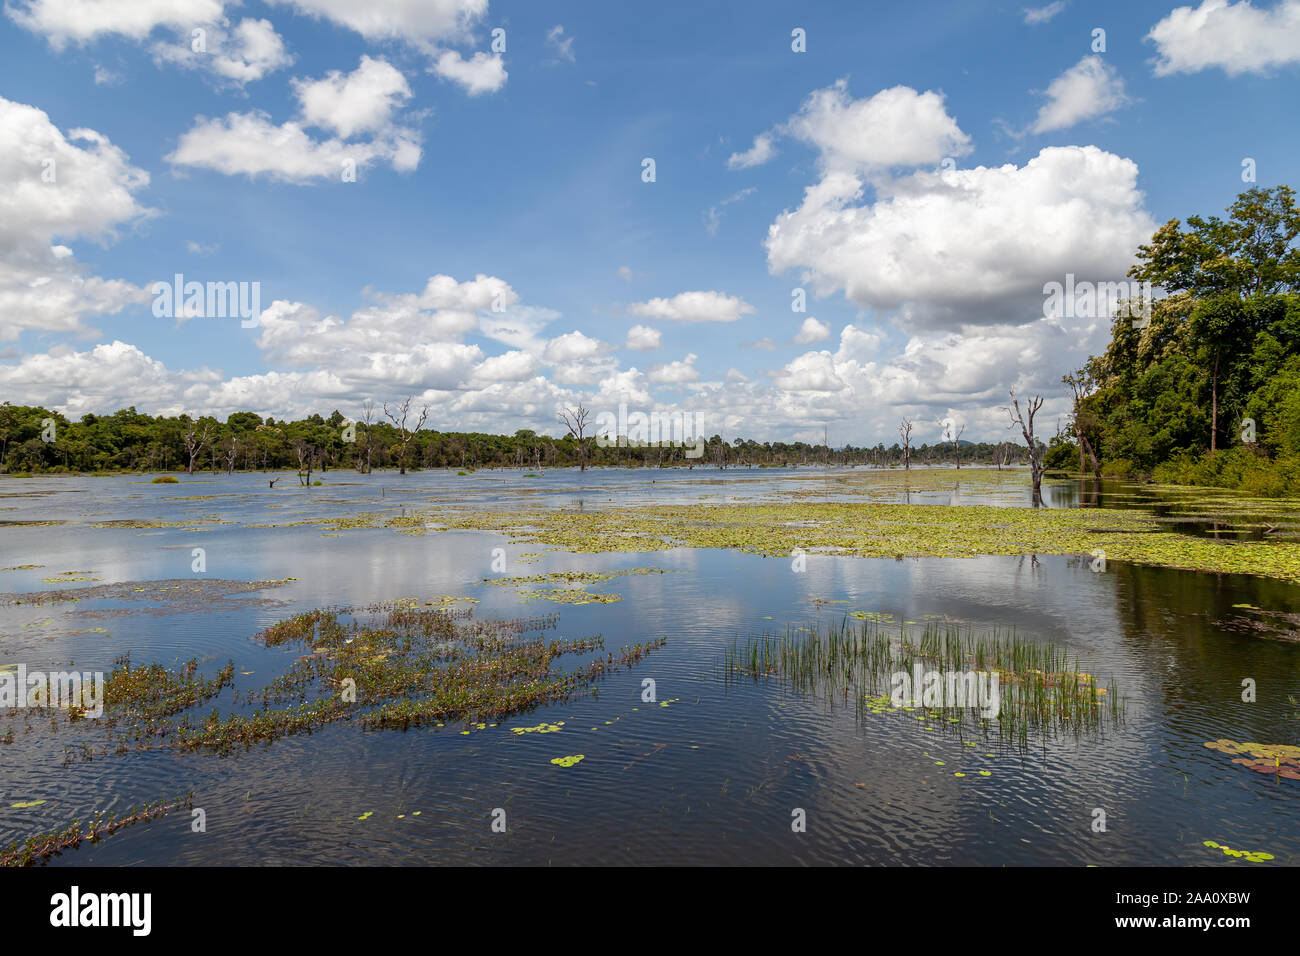 Flooded swamps in rainy season. Nice blue skies and white clouds reflect on the surface. Some plants are growing nicely with trees on the river banks. Stock Photo